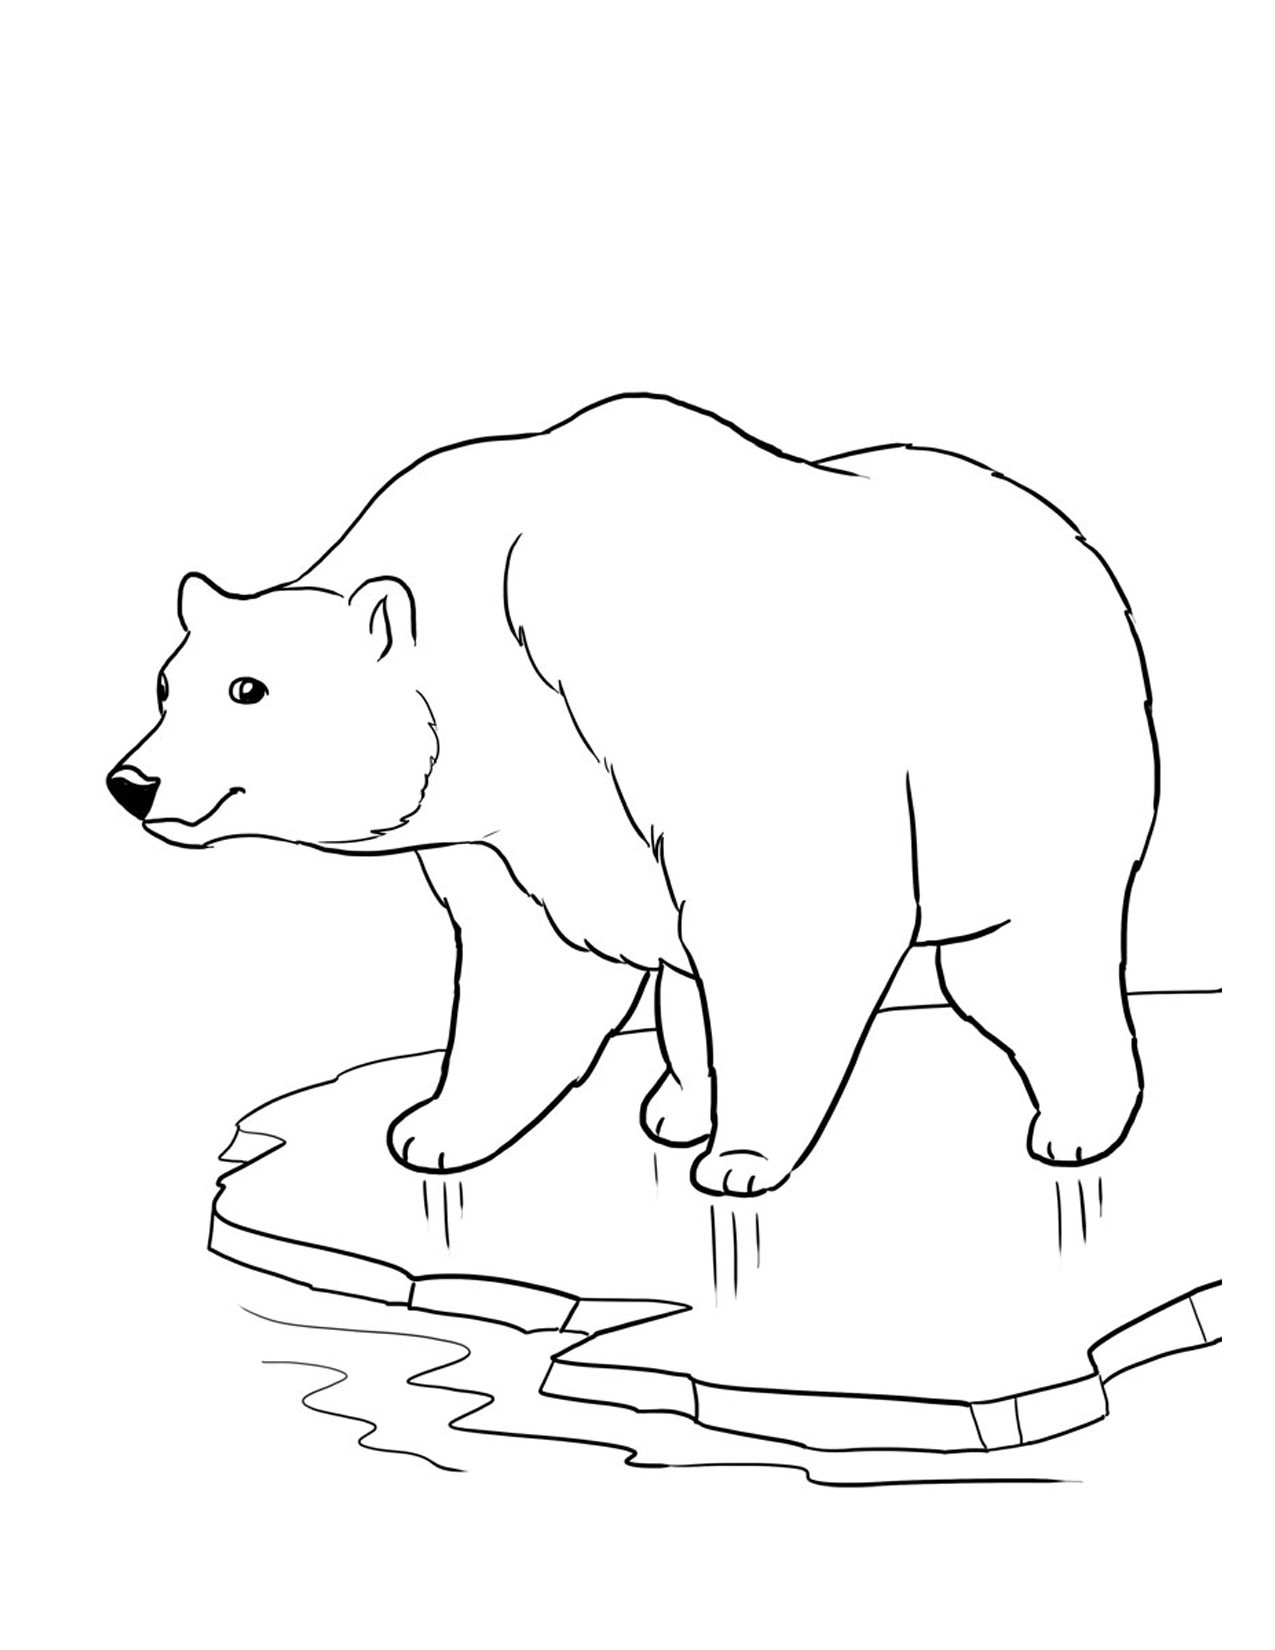 Bear Coloring Pages For Kids
 I love you more and more